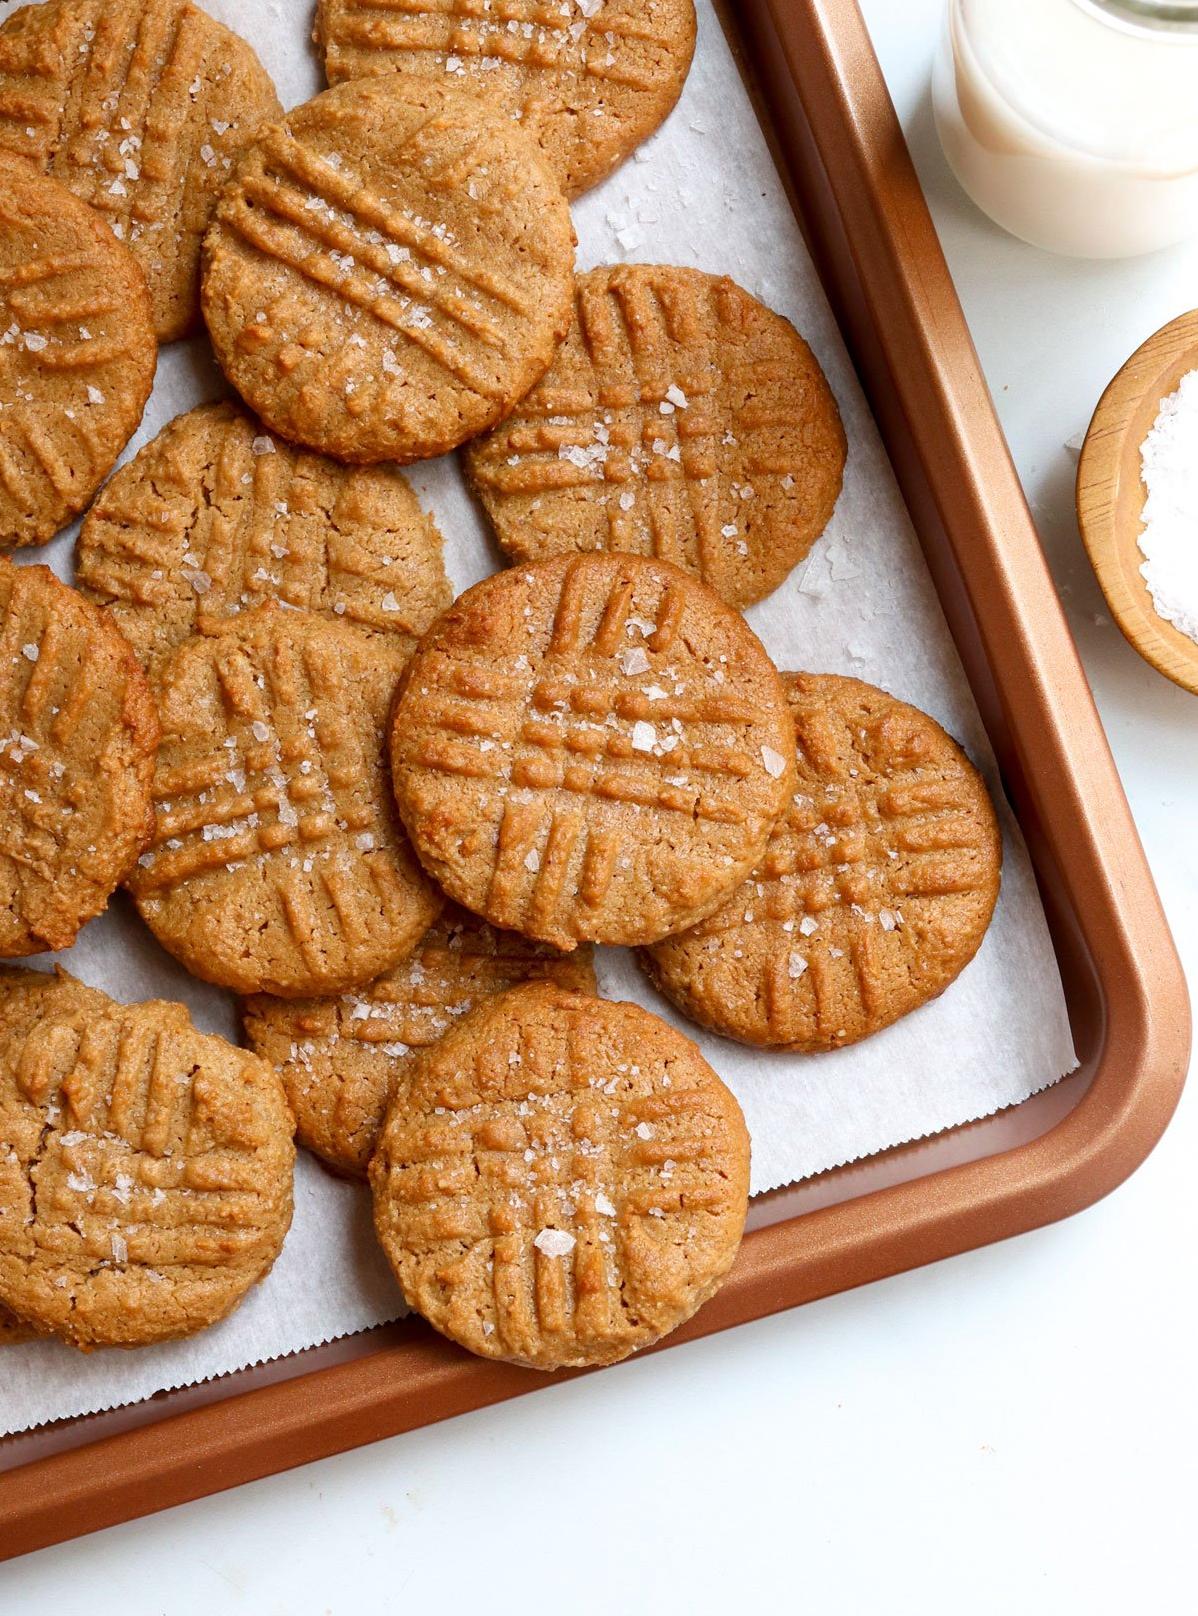  Bite into the ultimate combination of crunchy and chewy with these Almost Flourless Peanut Butter Cookies